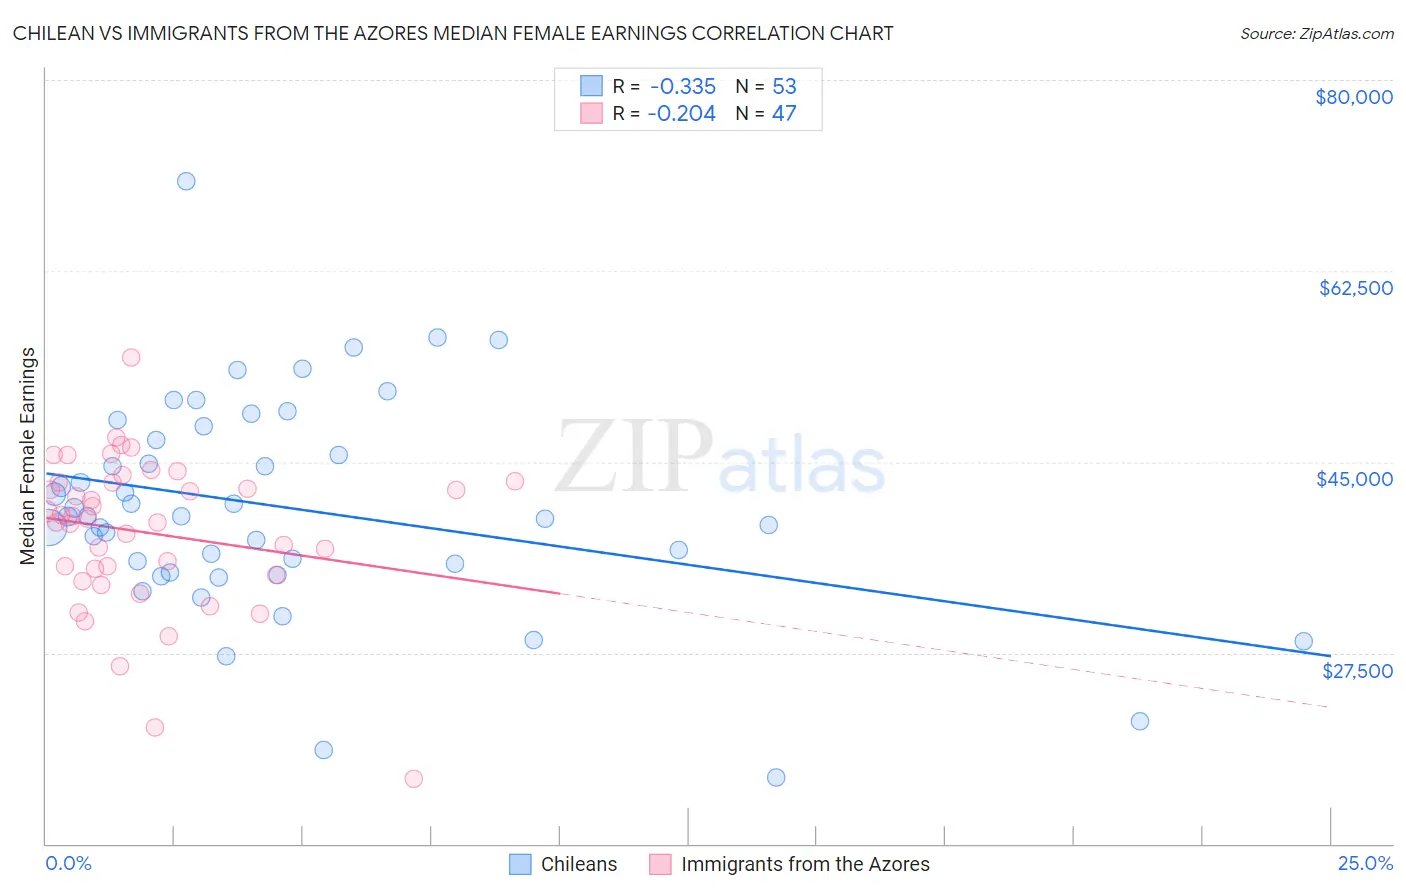 Chilean vs Immigrants from the Azores Median Female Earnings